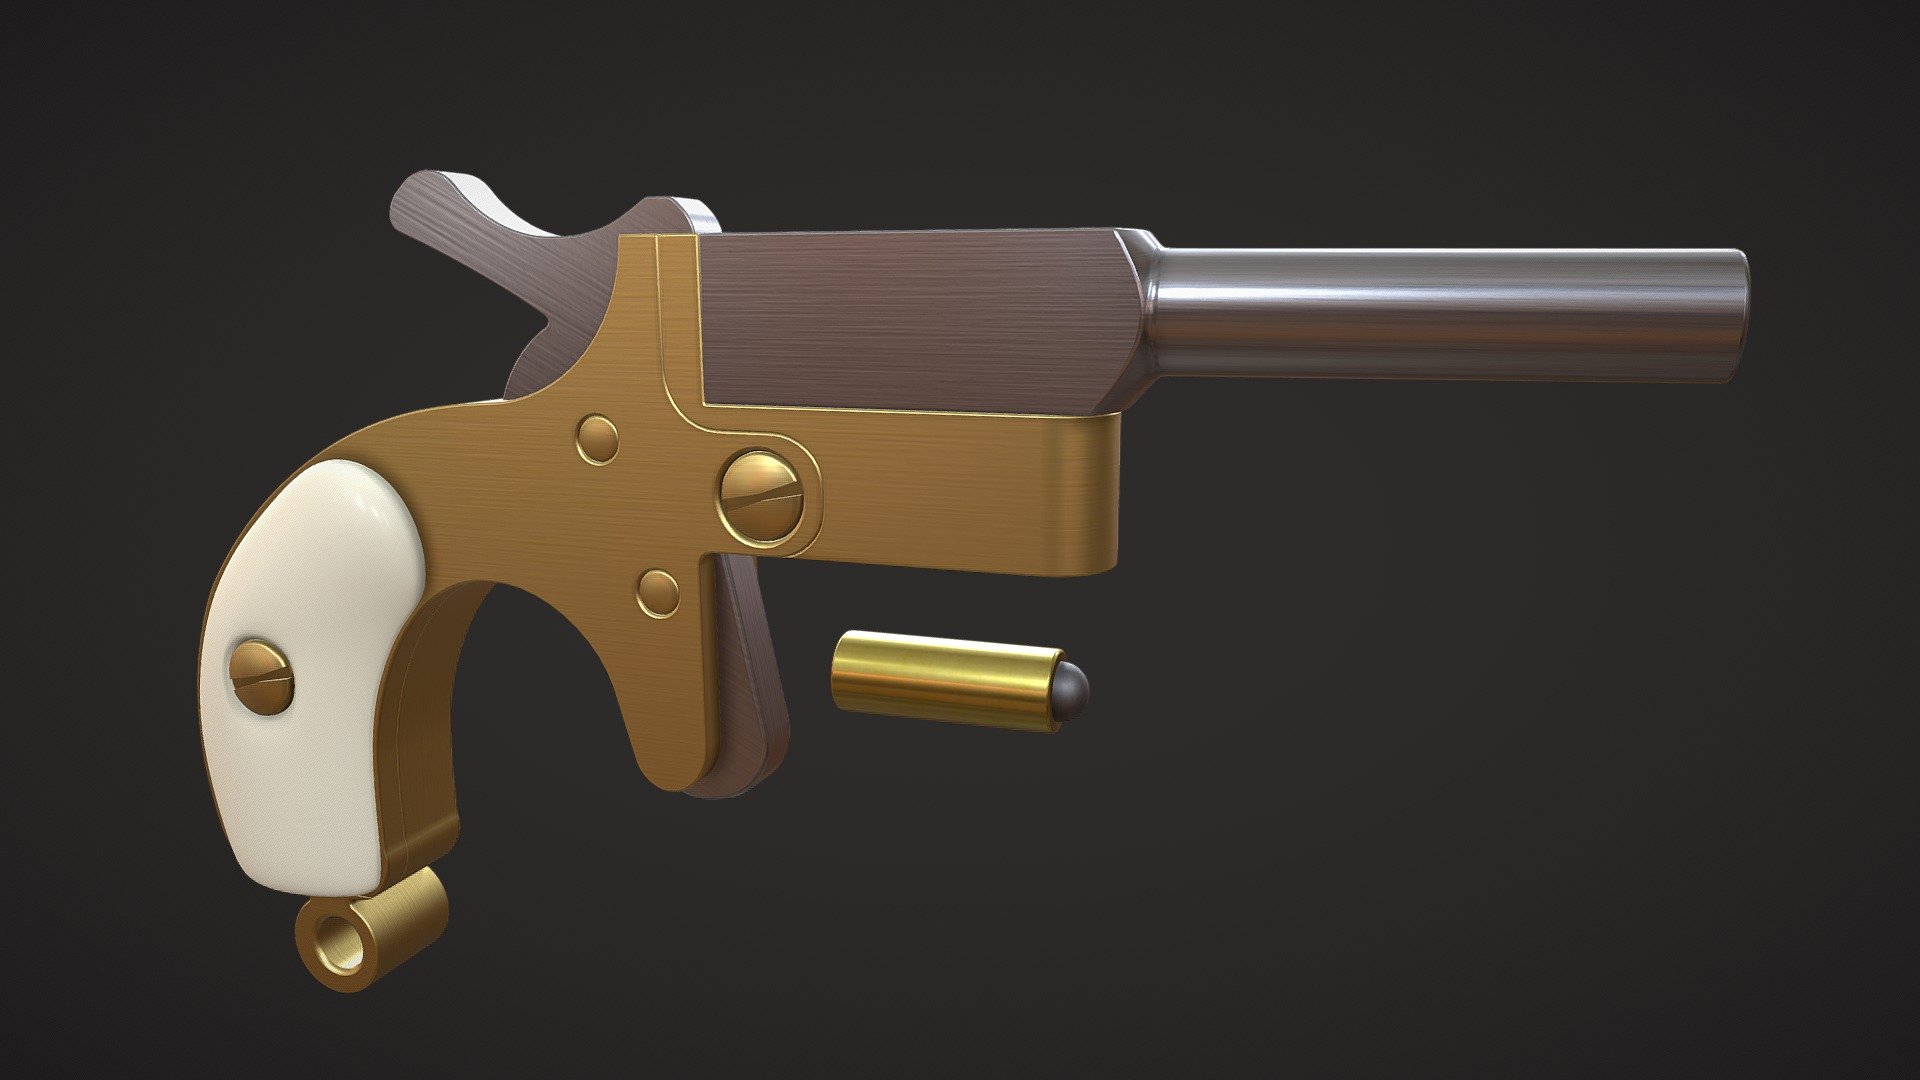 Atomic Derringer Pistol prop, made of brass, aluminium, wood, plus some  LEDs to make it look more alive. : r/sciencefiction